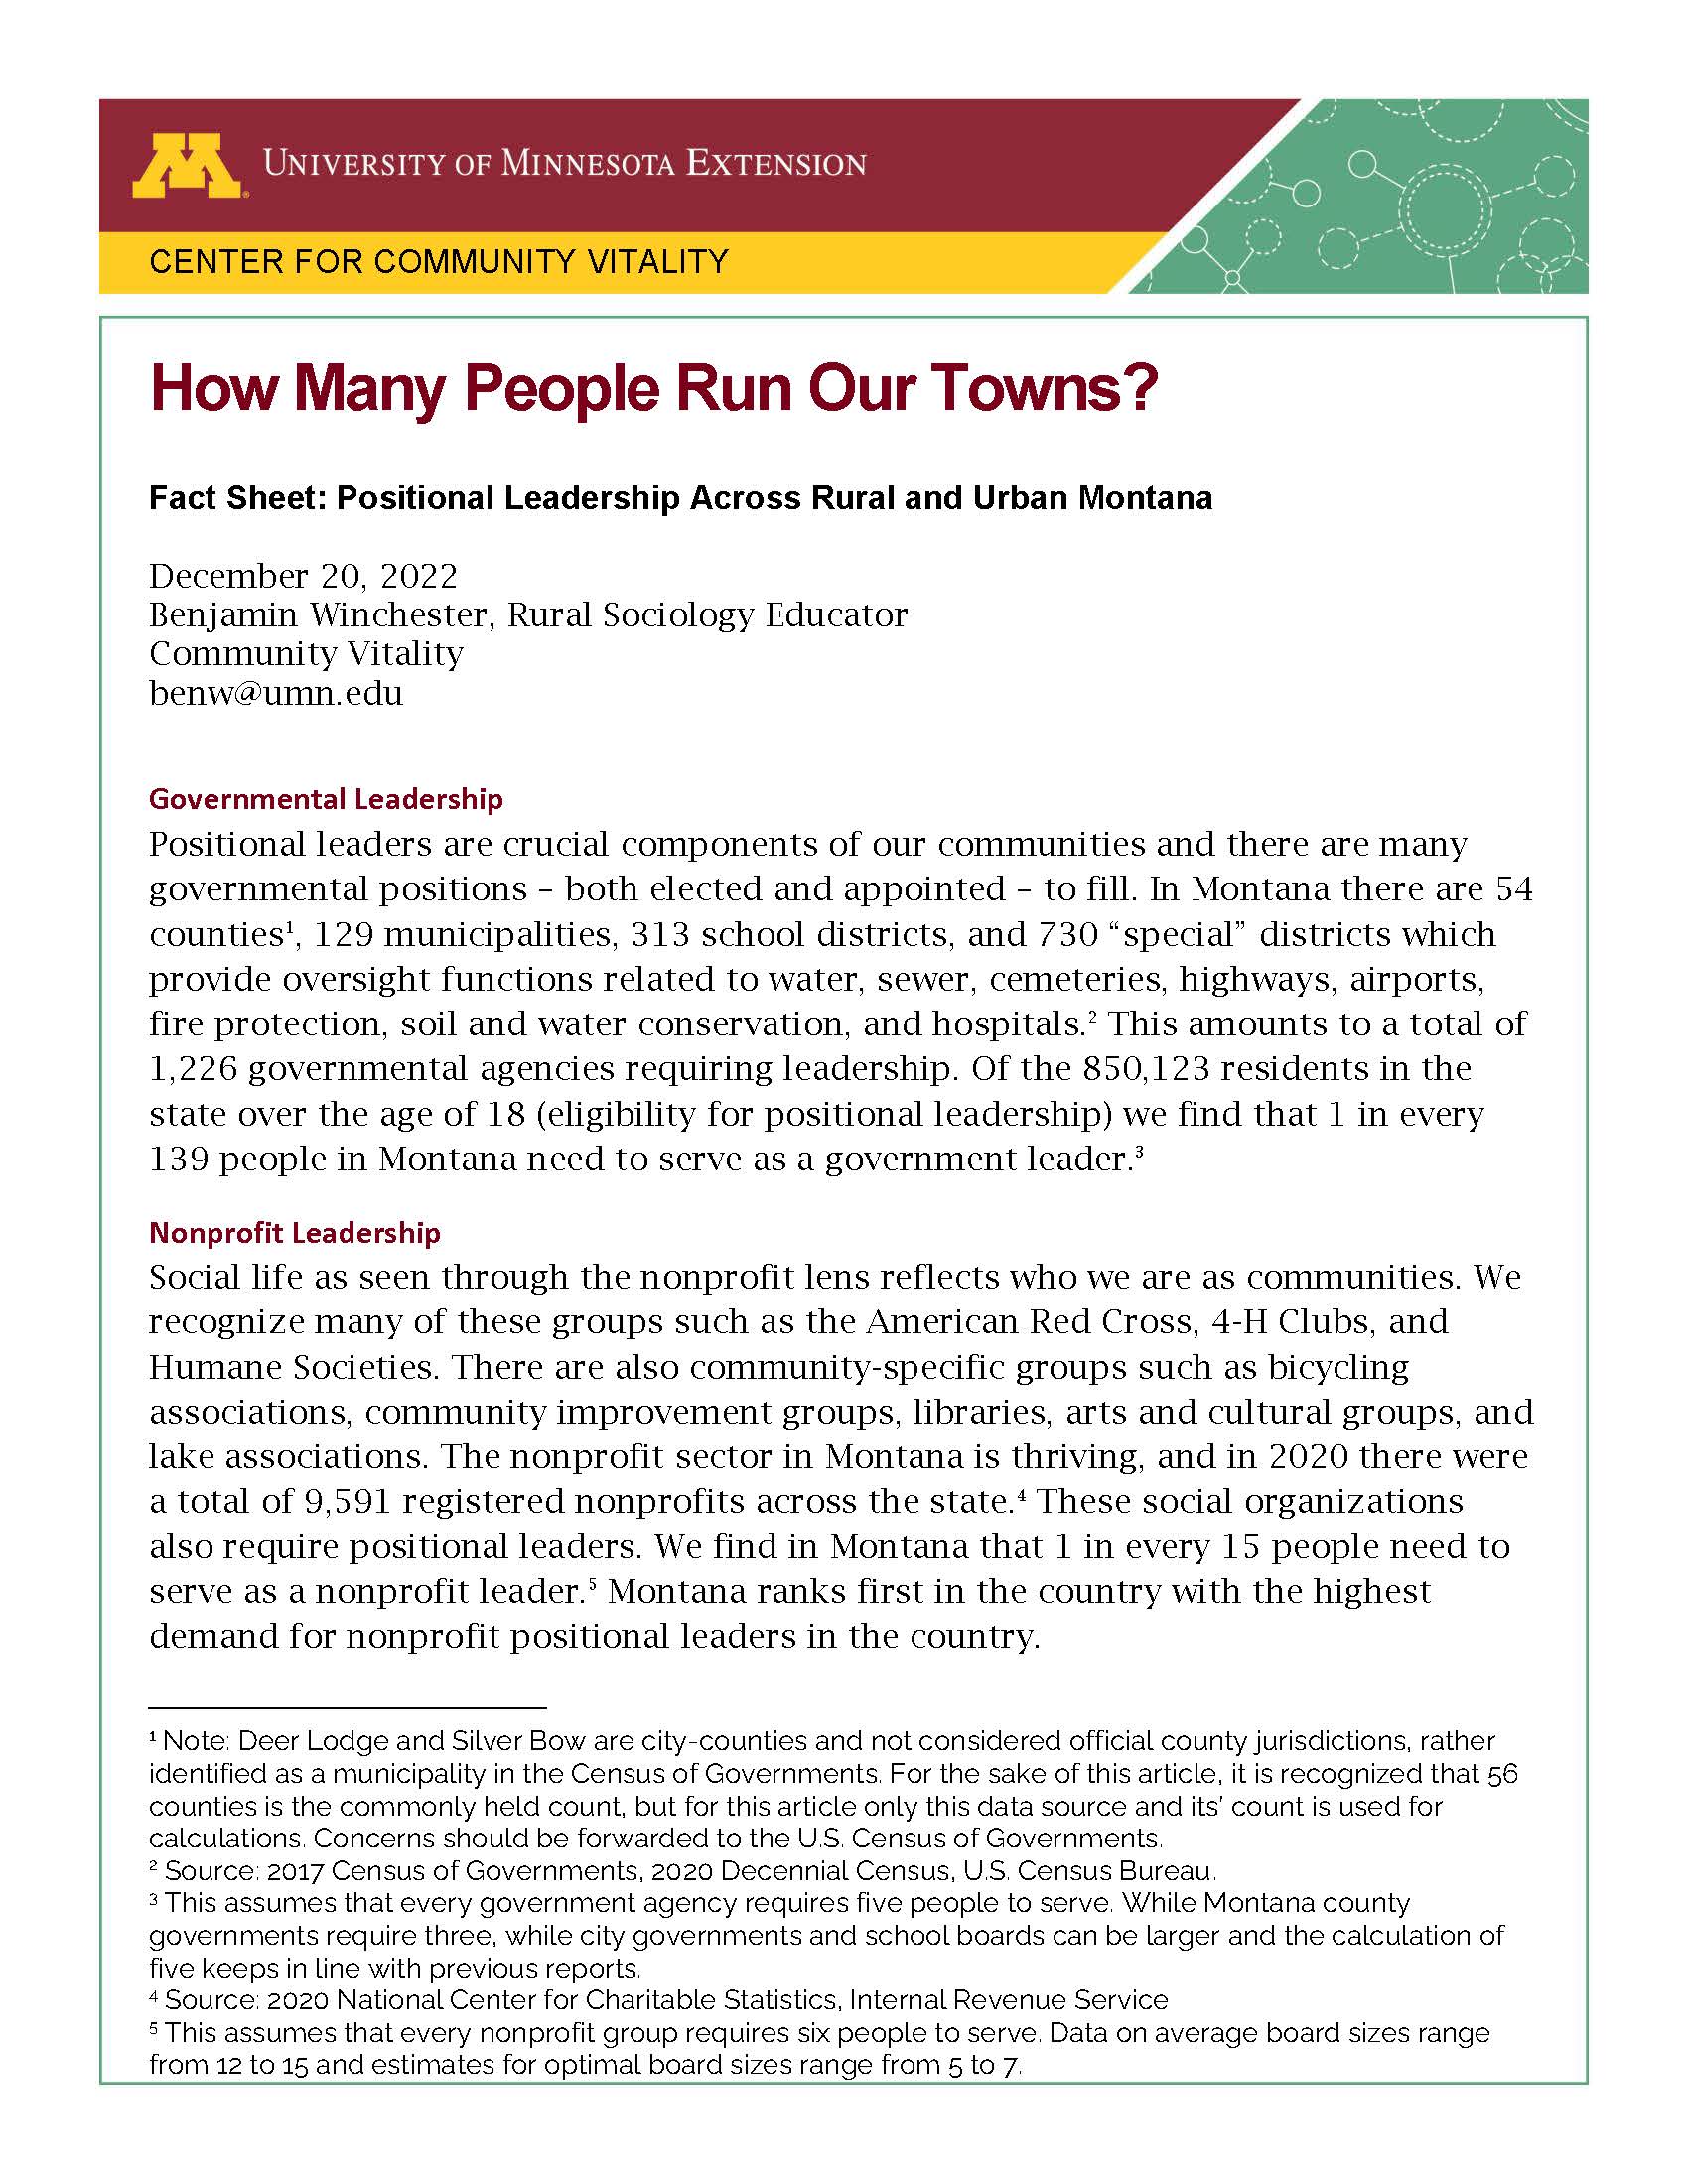 Image of the How Many People Run Our Towns? factsheet cover 